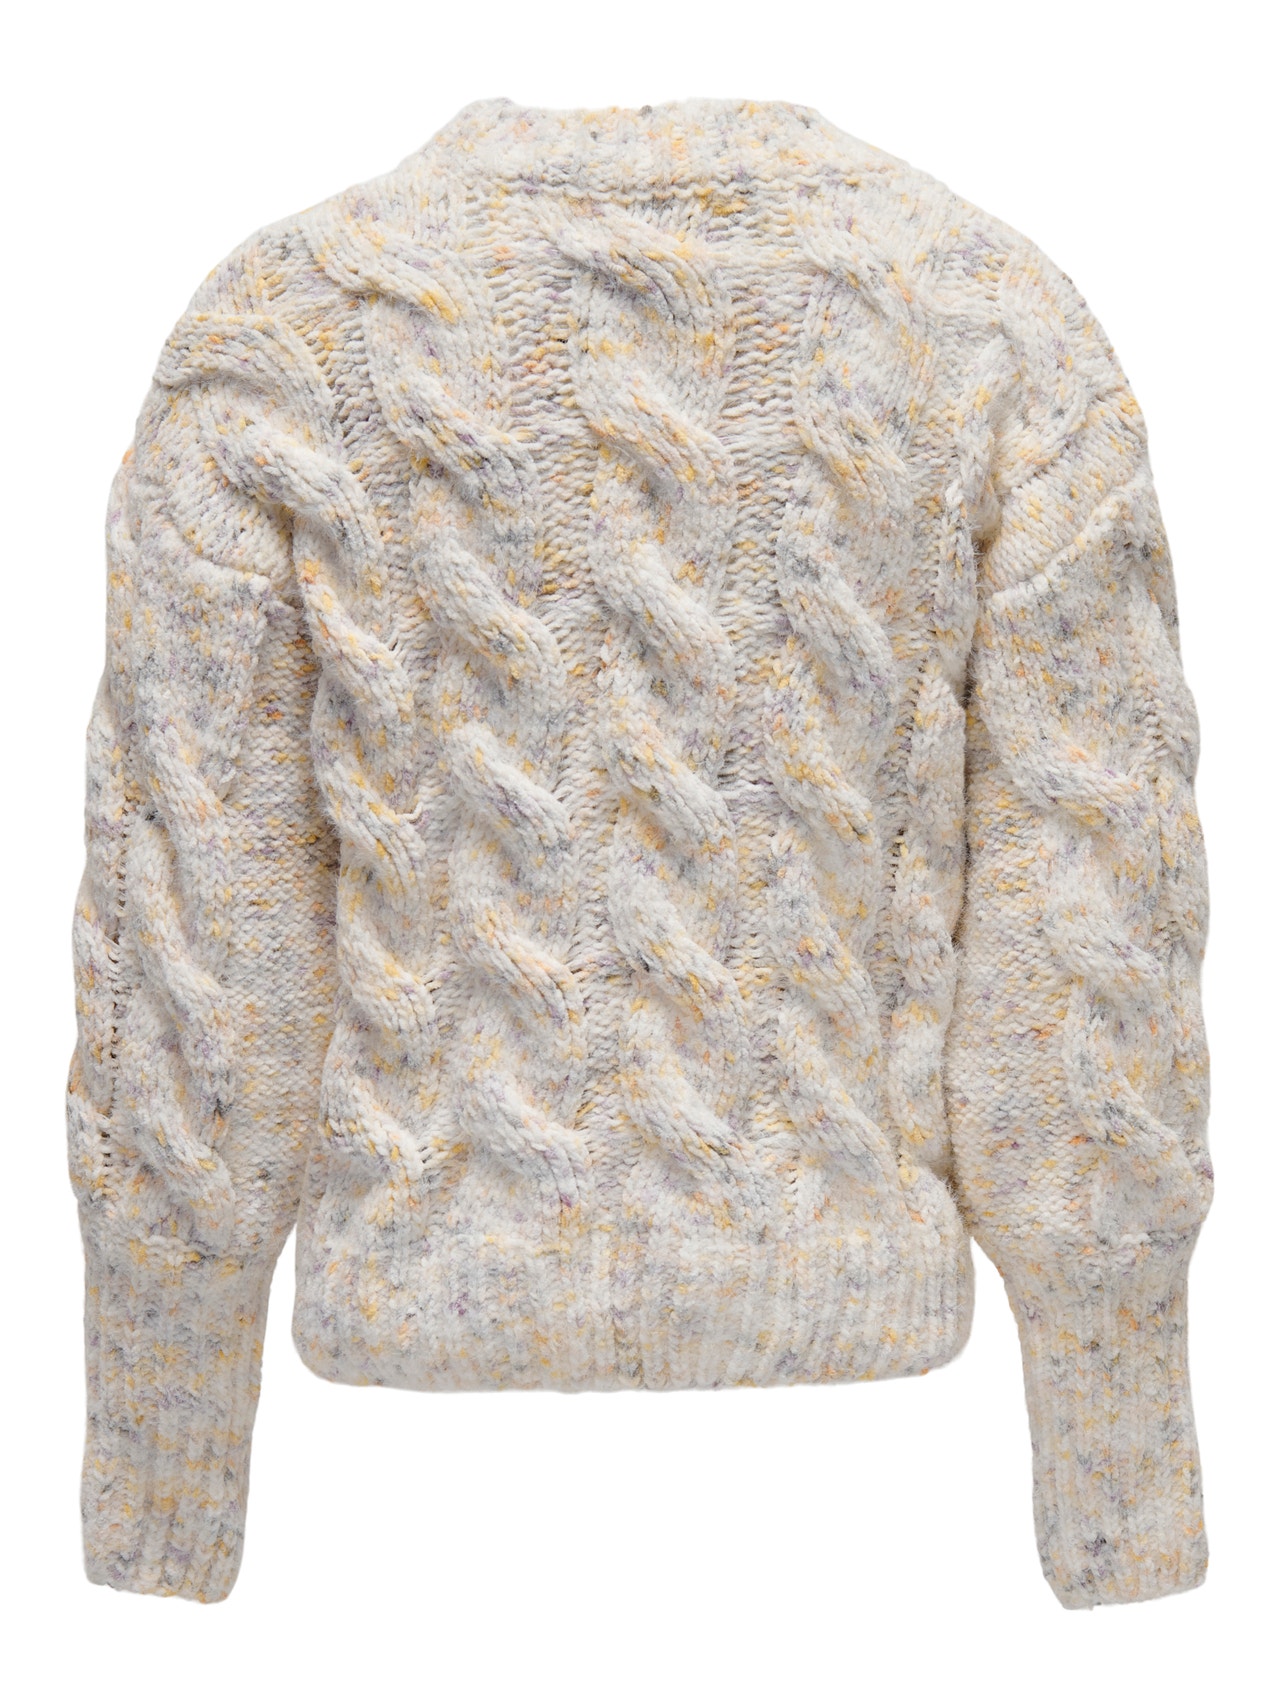 ONLY Chunky Cable Knit Pullover -Cloud Dancer - 15273013